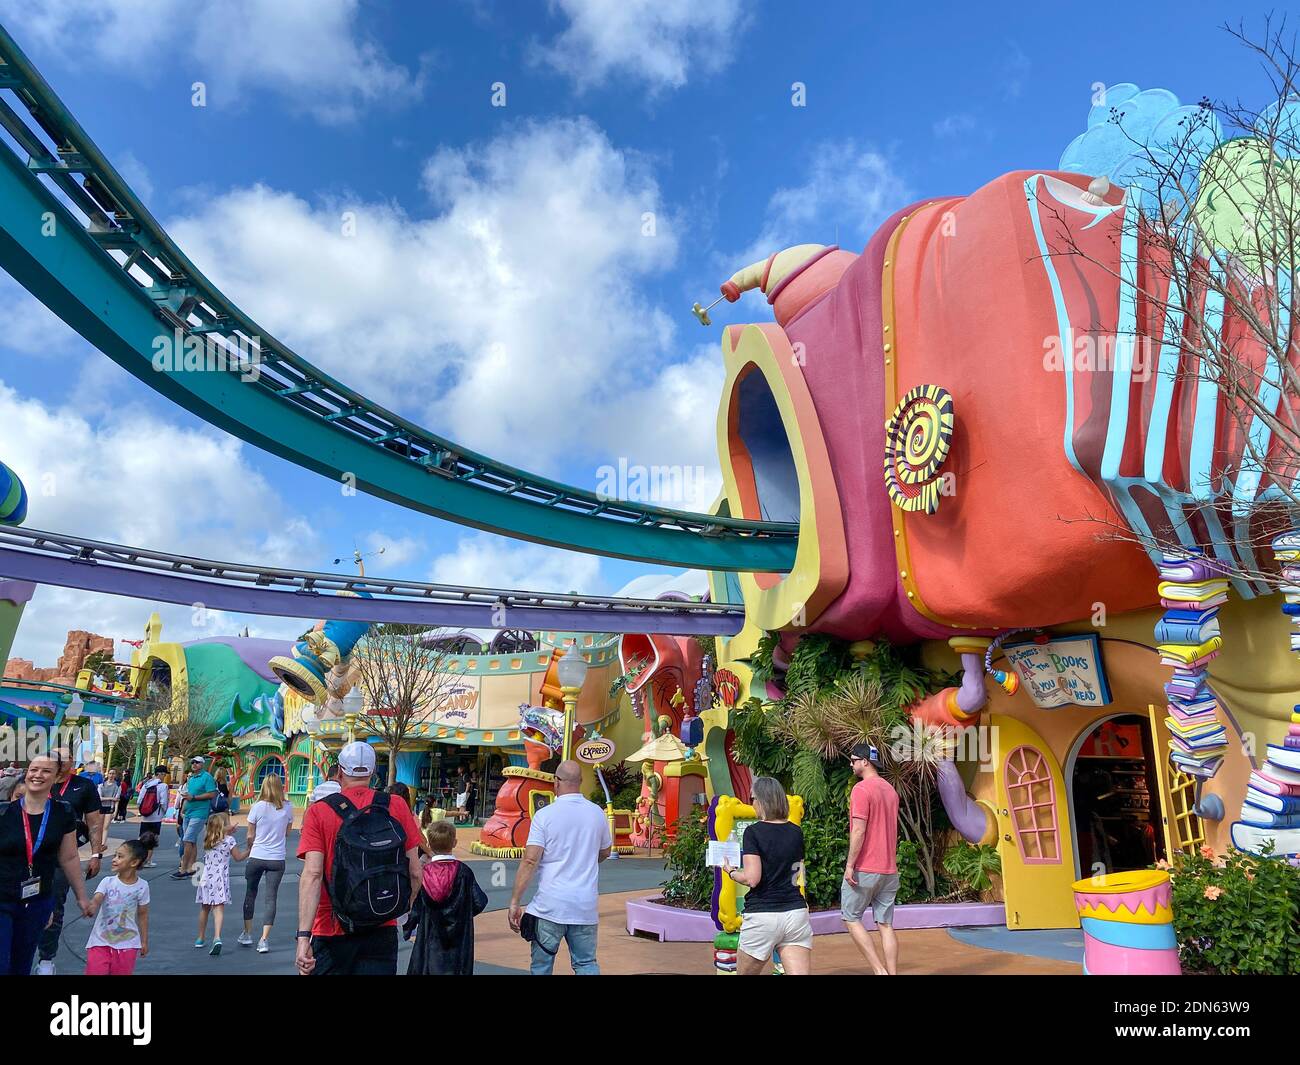 Orlando, FL USA - February 16, 2020: The Dr. Suess Cat in the Hat area in the Universal Studios theme park. Stock Photo